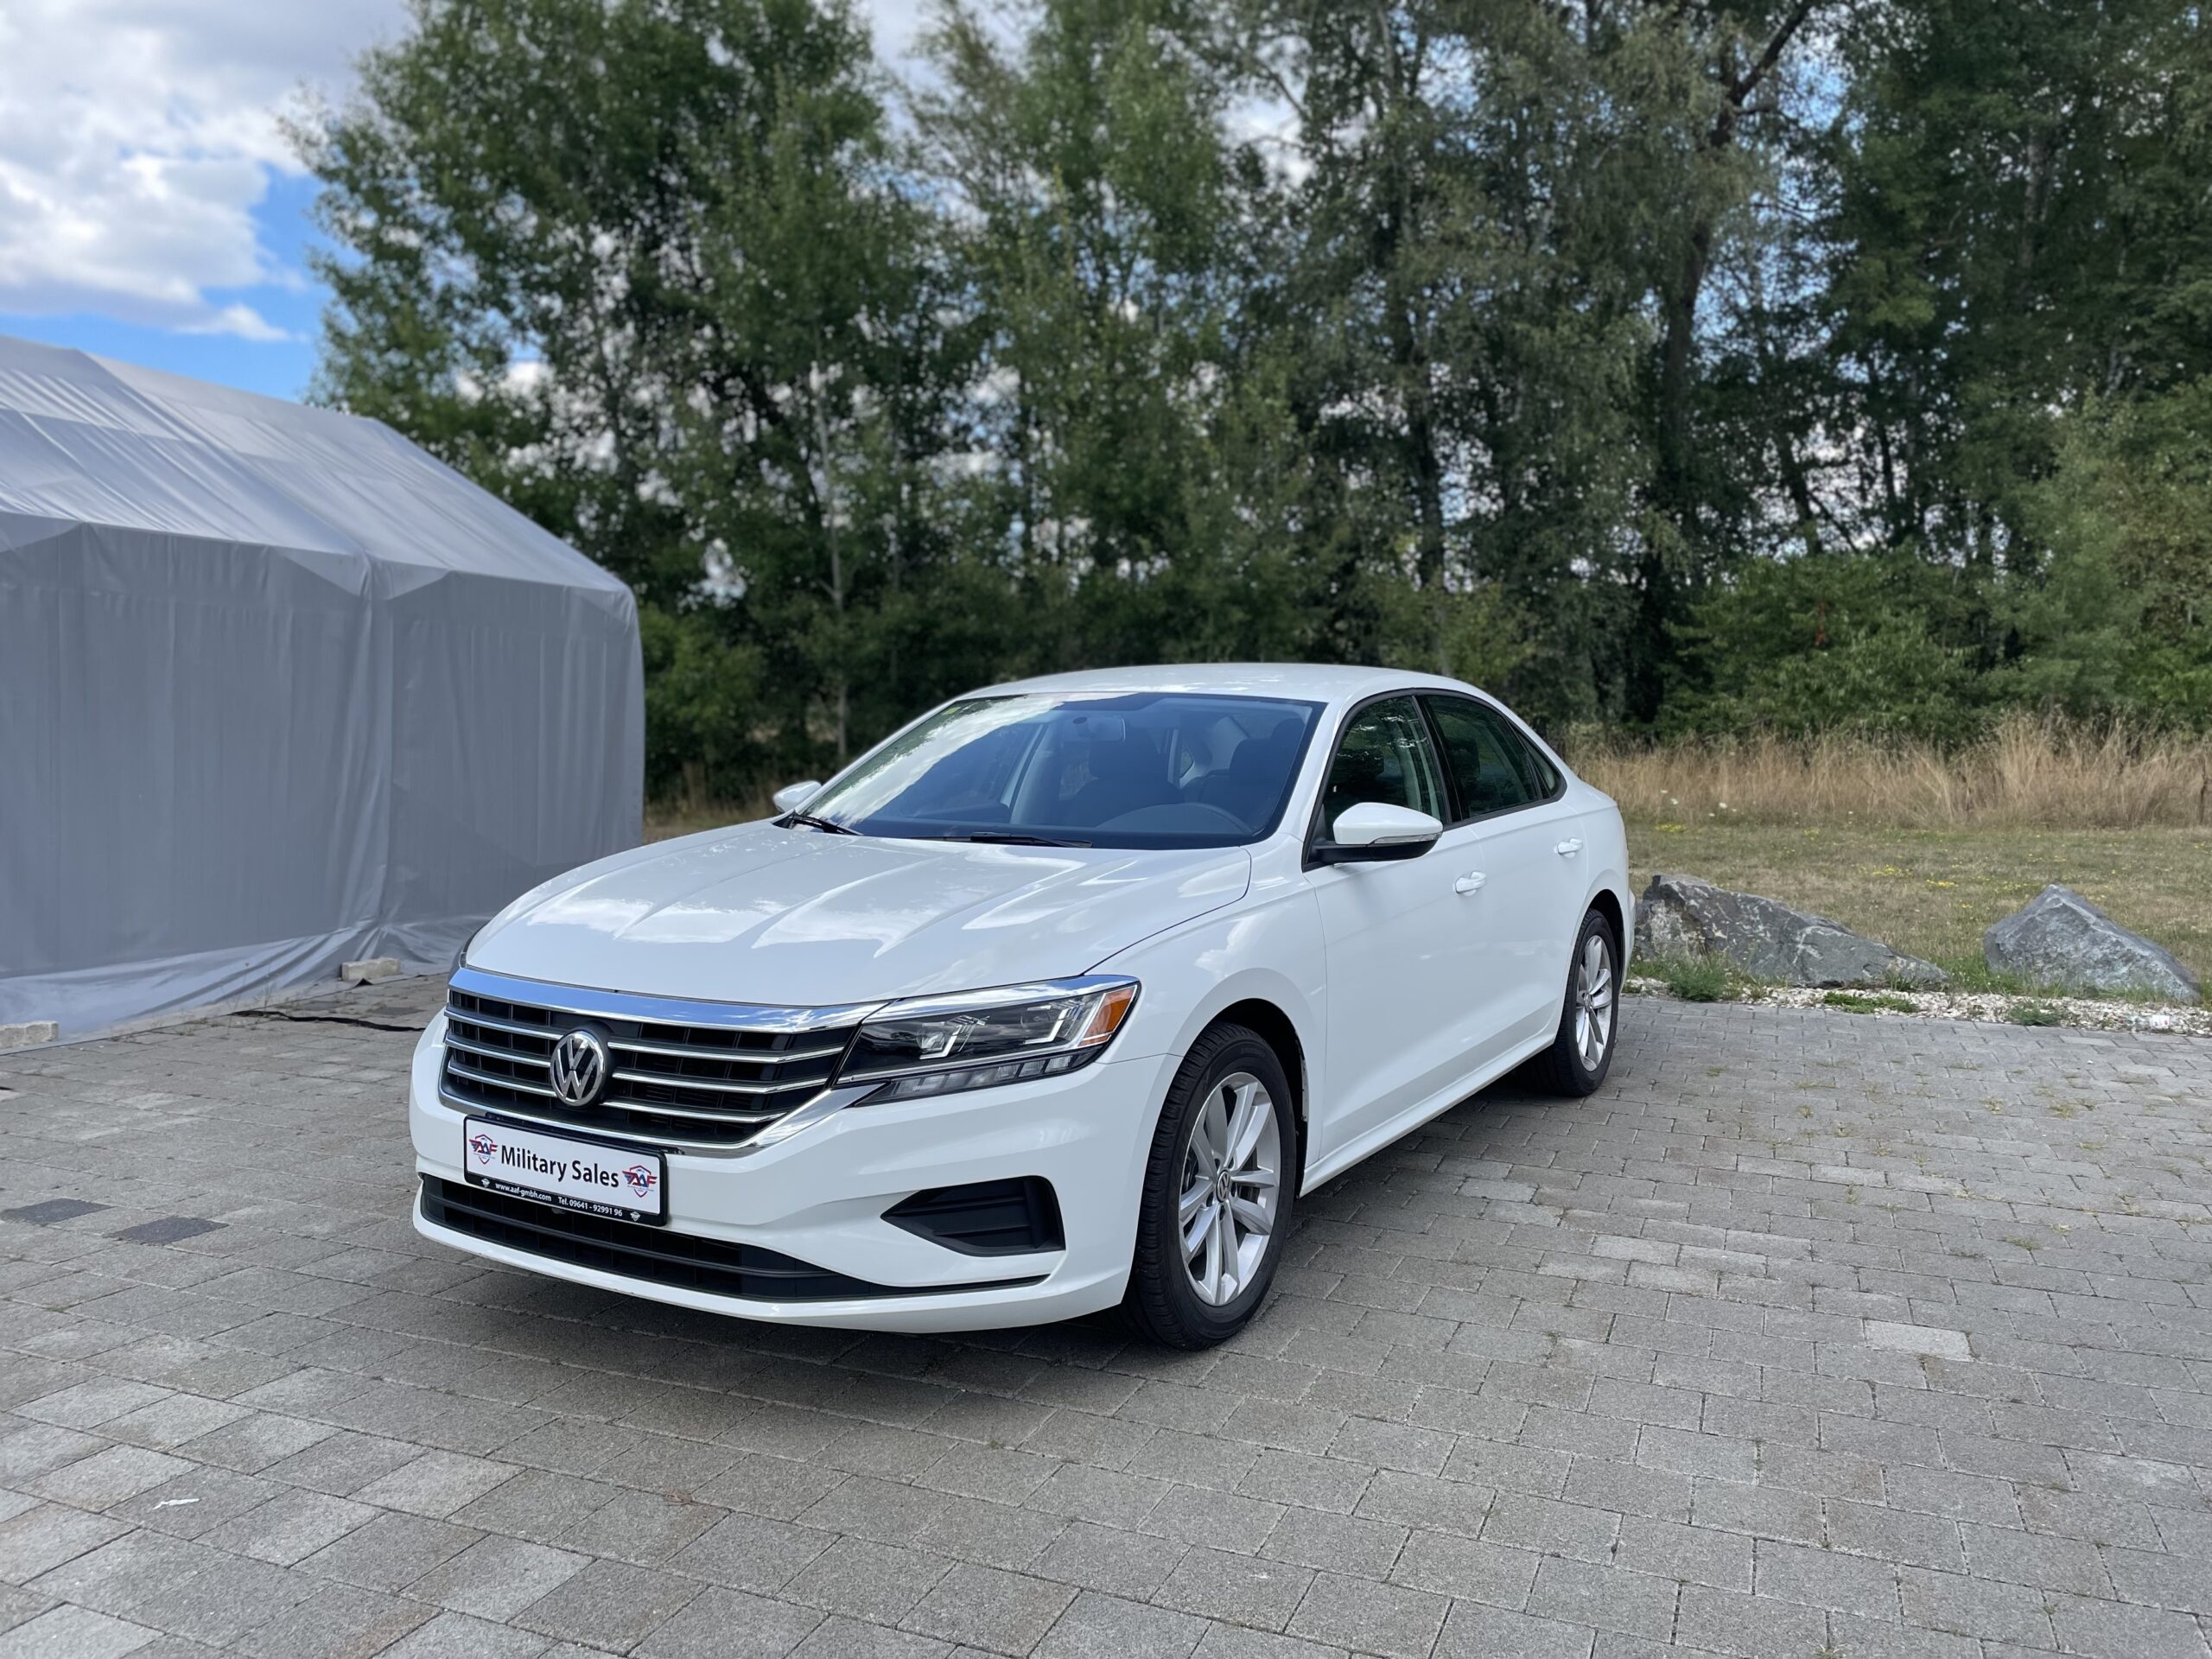 2021 Volkswagen Passat<br>FWD</br>as low as </br>$262per paycheck